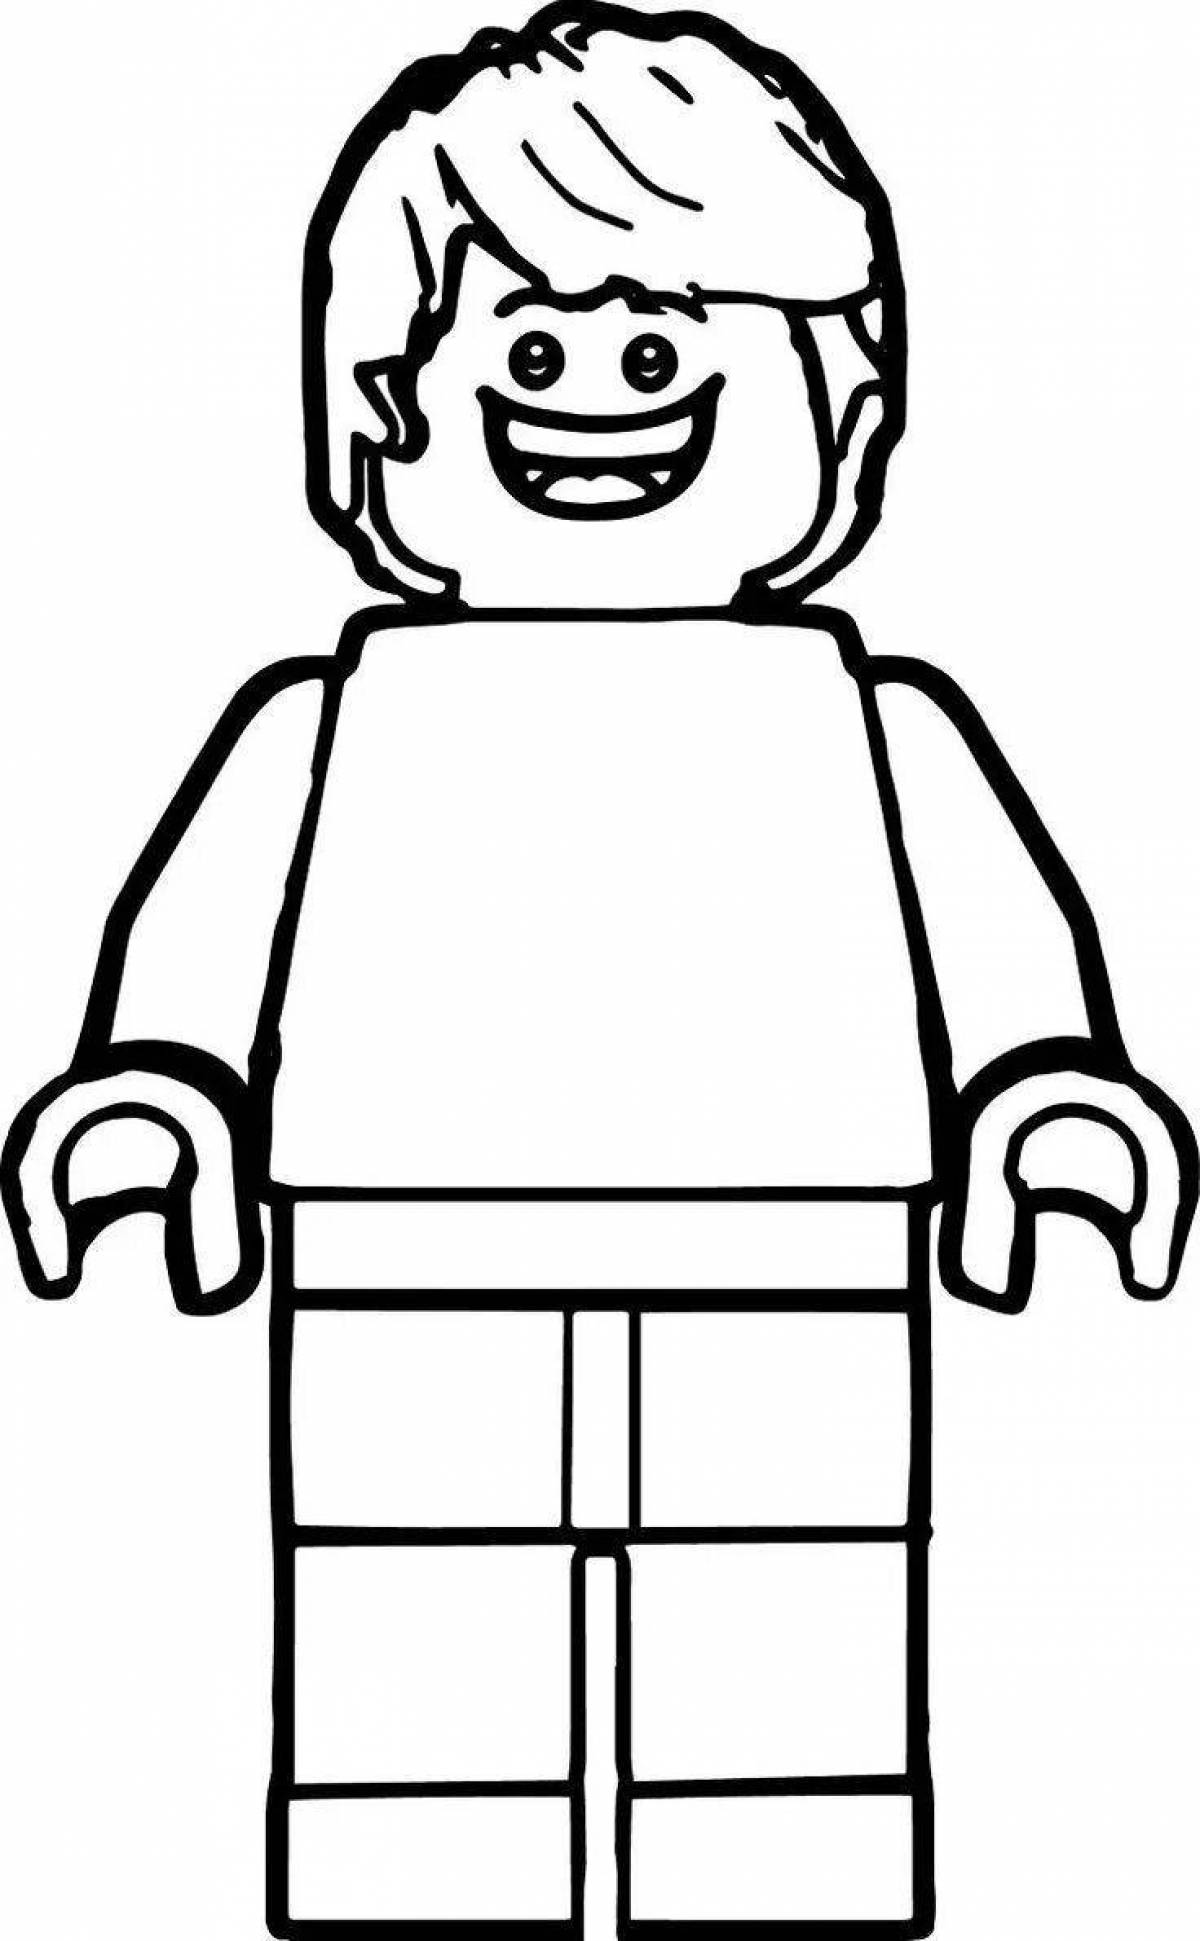 Bright coloring lego figures coloring page